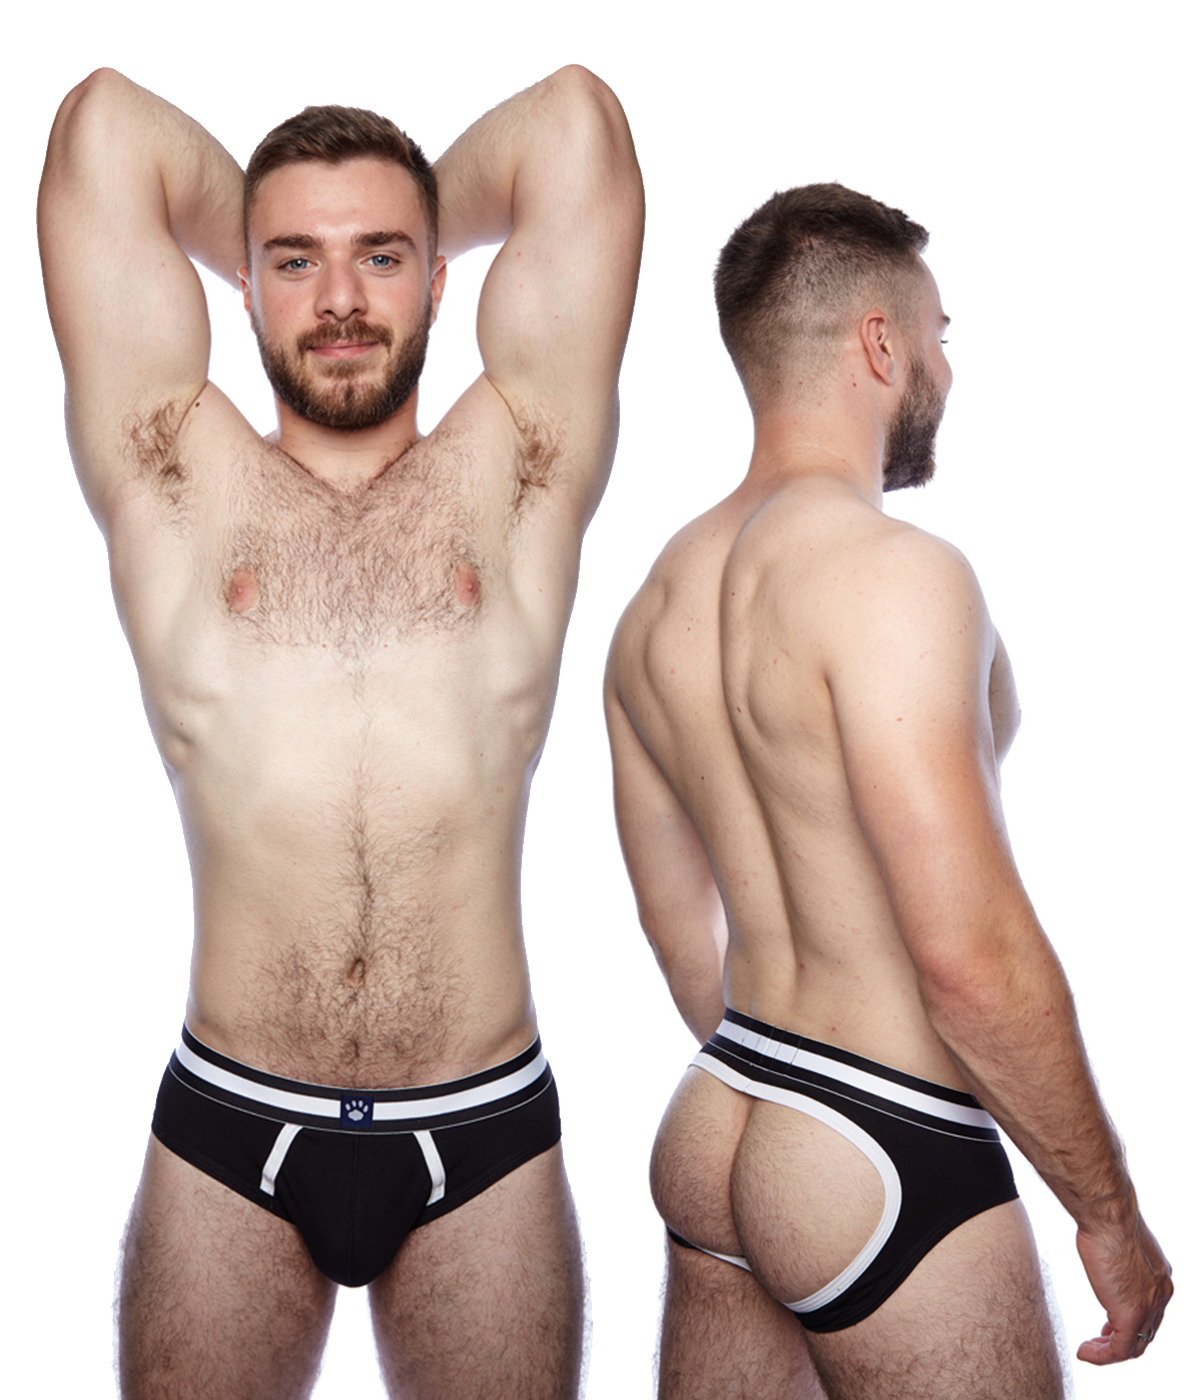 PROWLER CLASSIC BACKLESS BRIEF BLACK/WHITE 